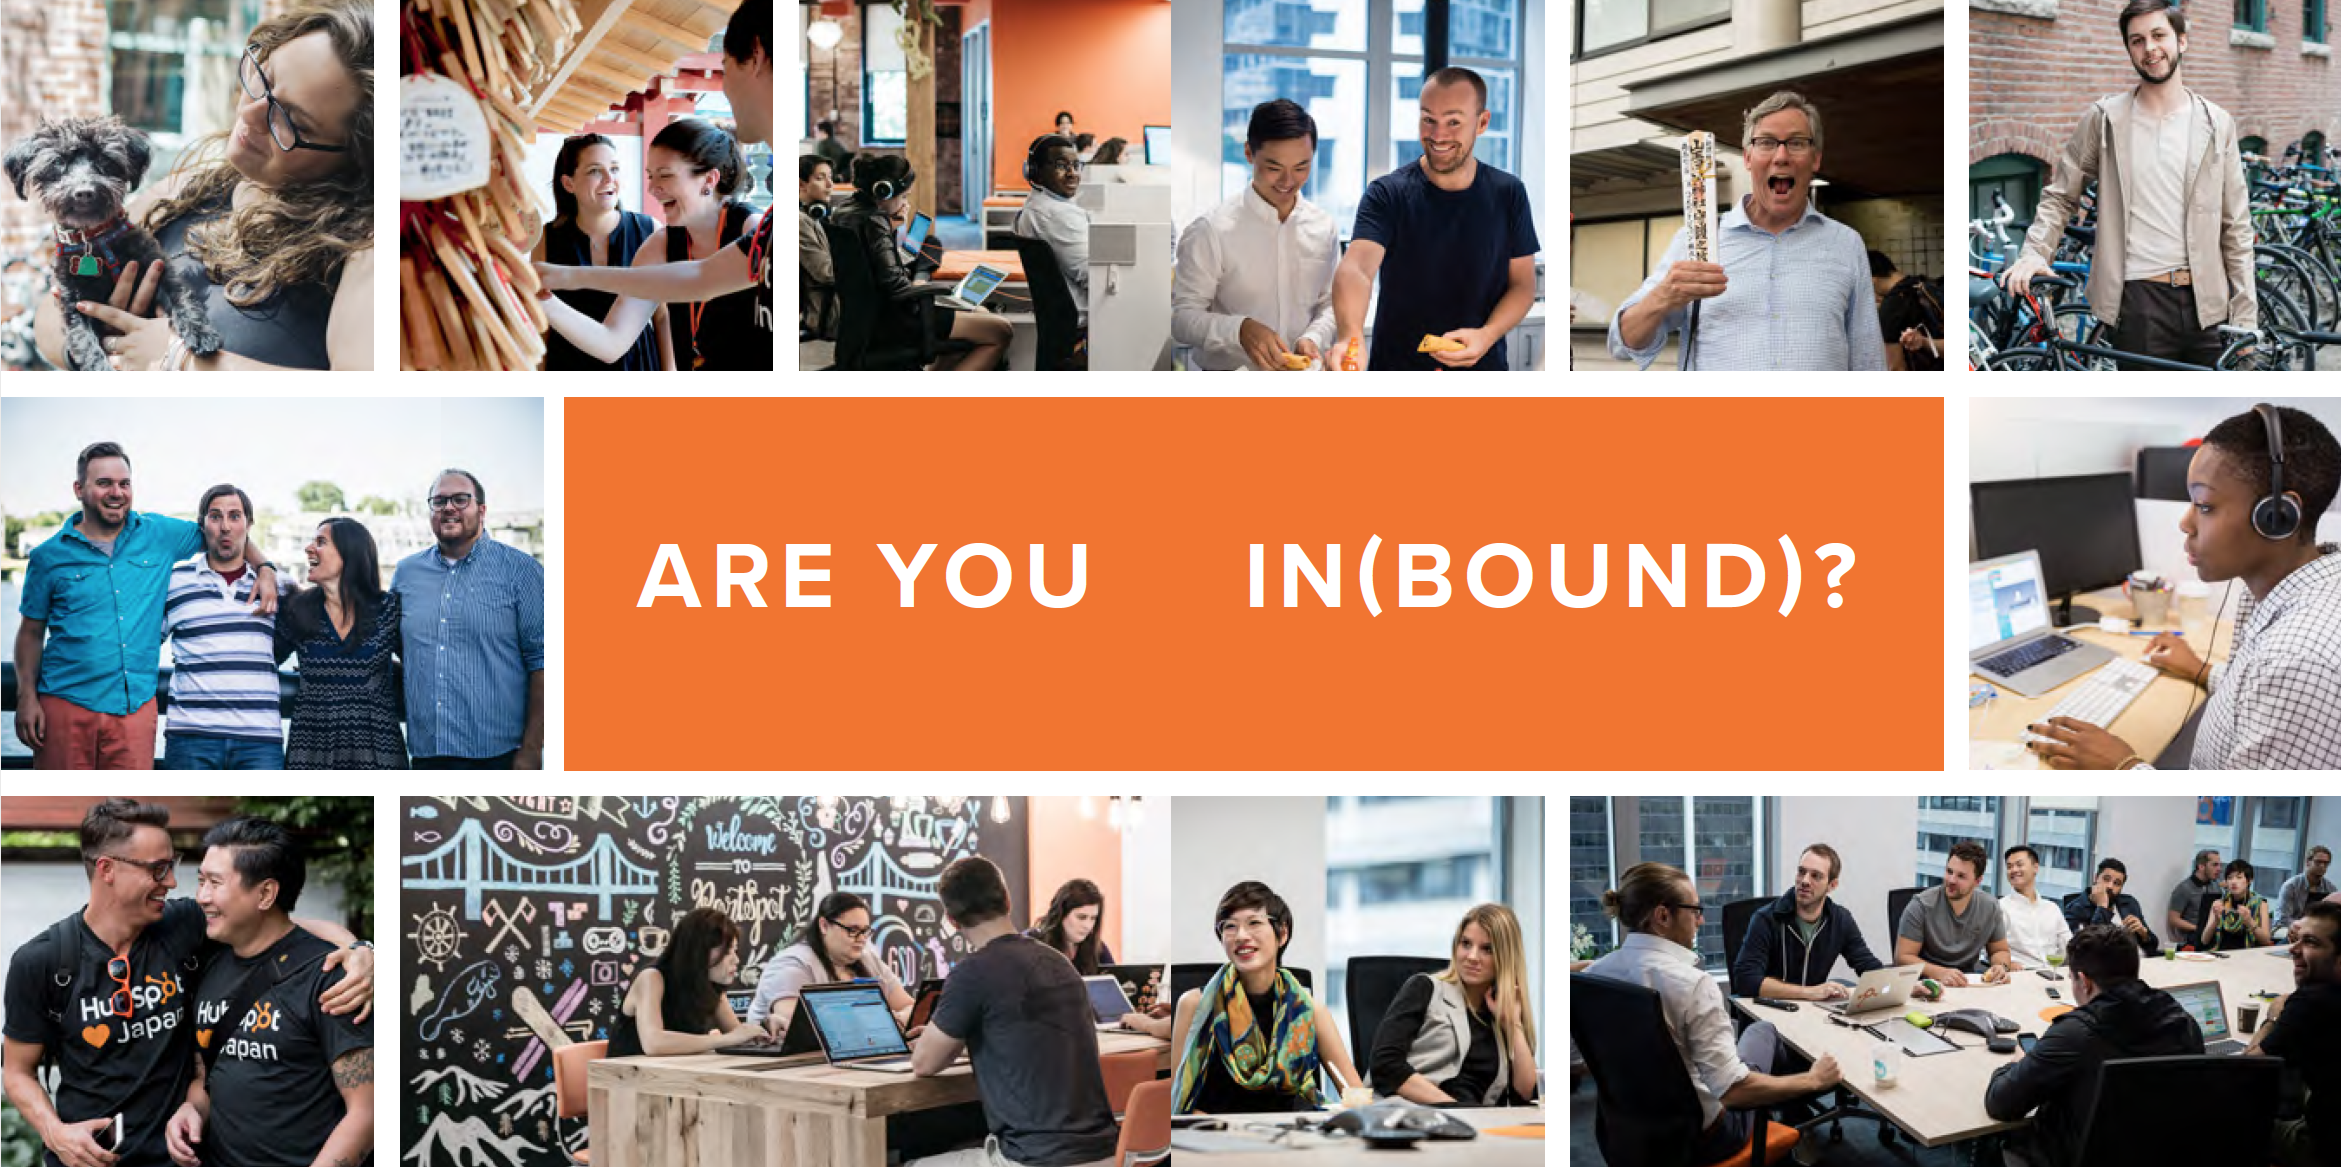 HubSpot Releases 10th Annual Year in Review, with a Focus on Flexibility